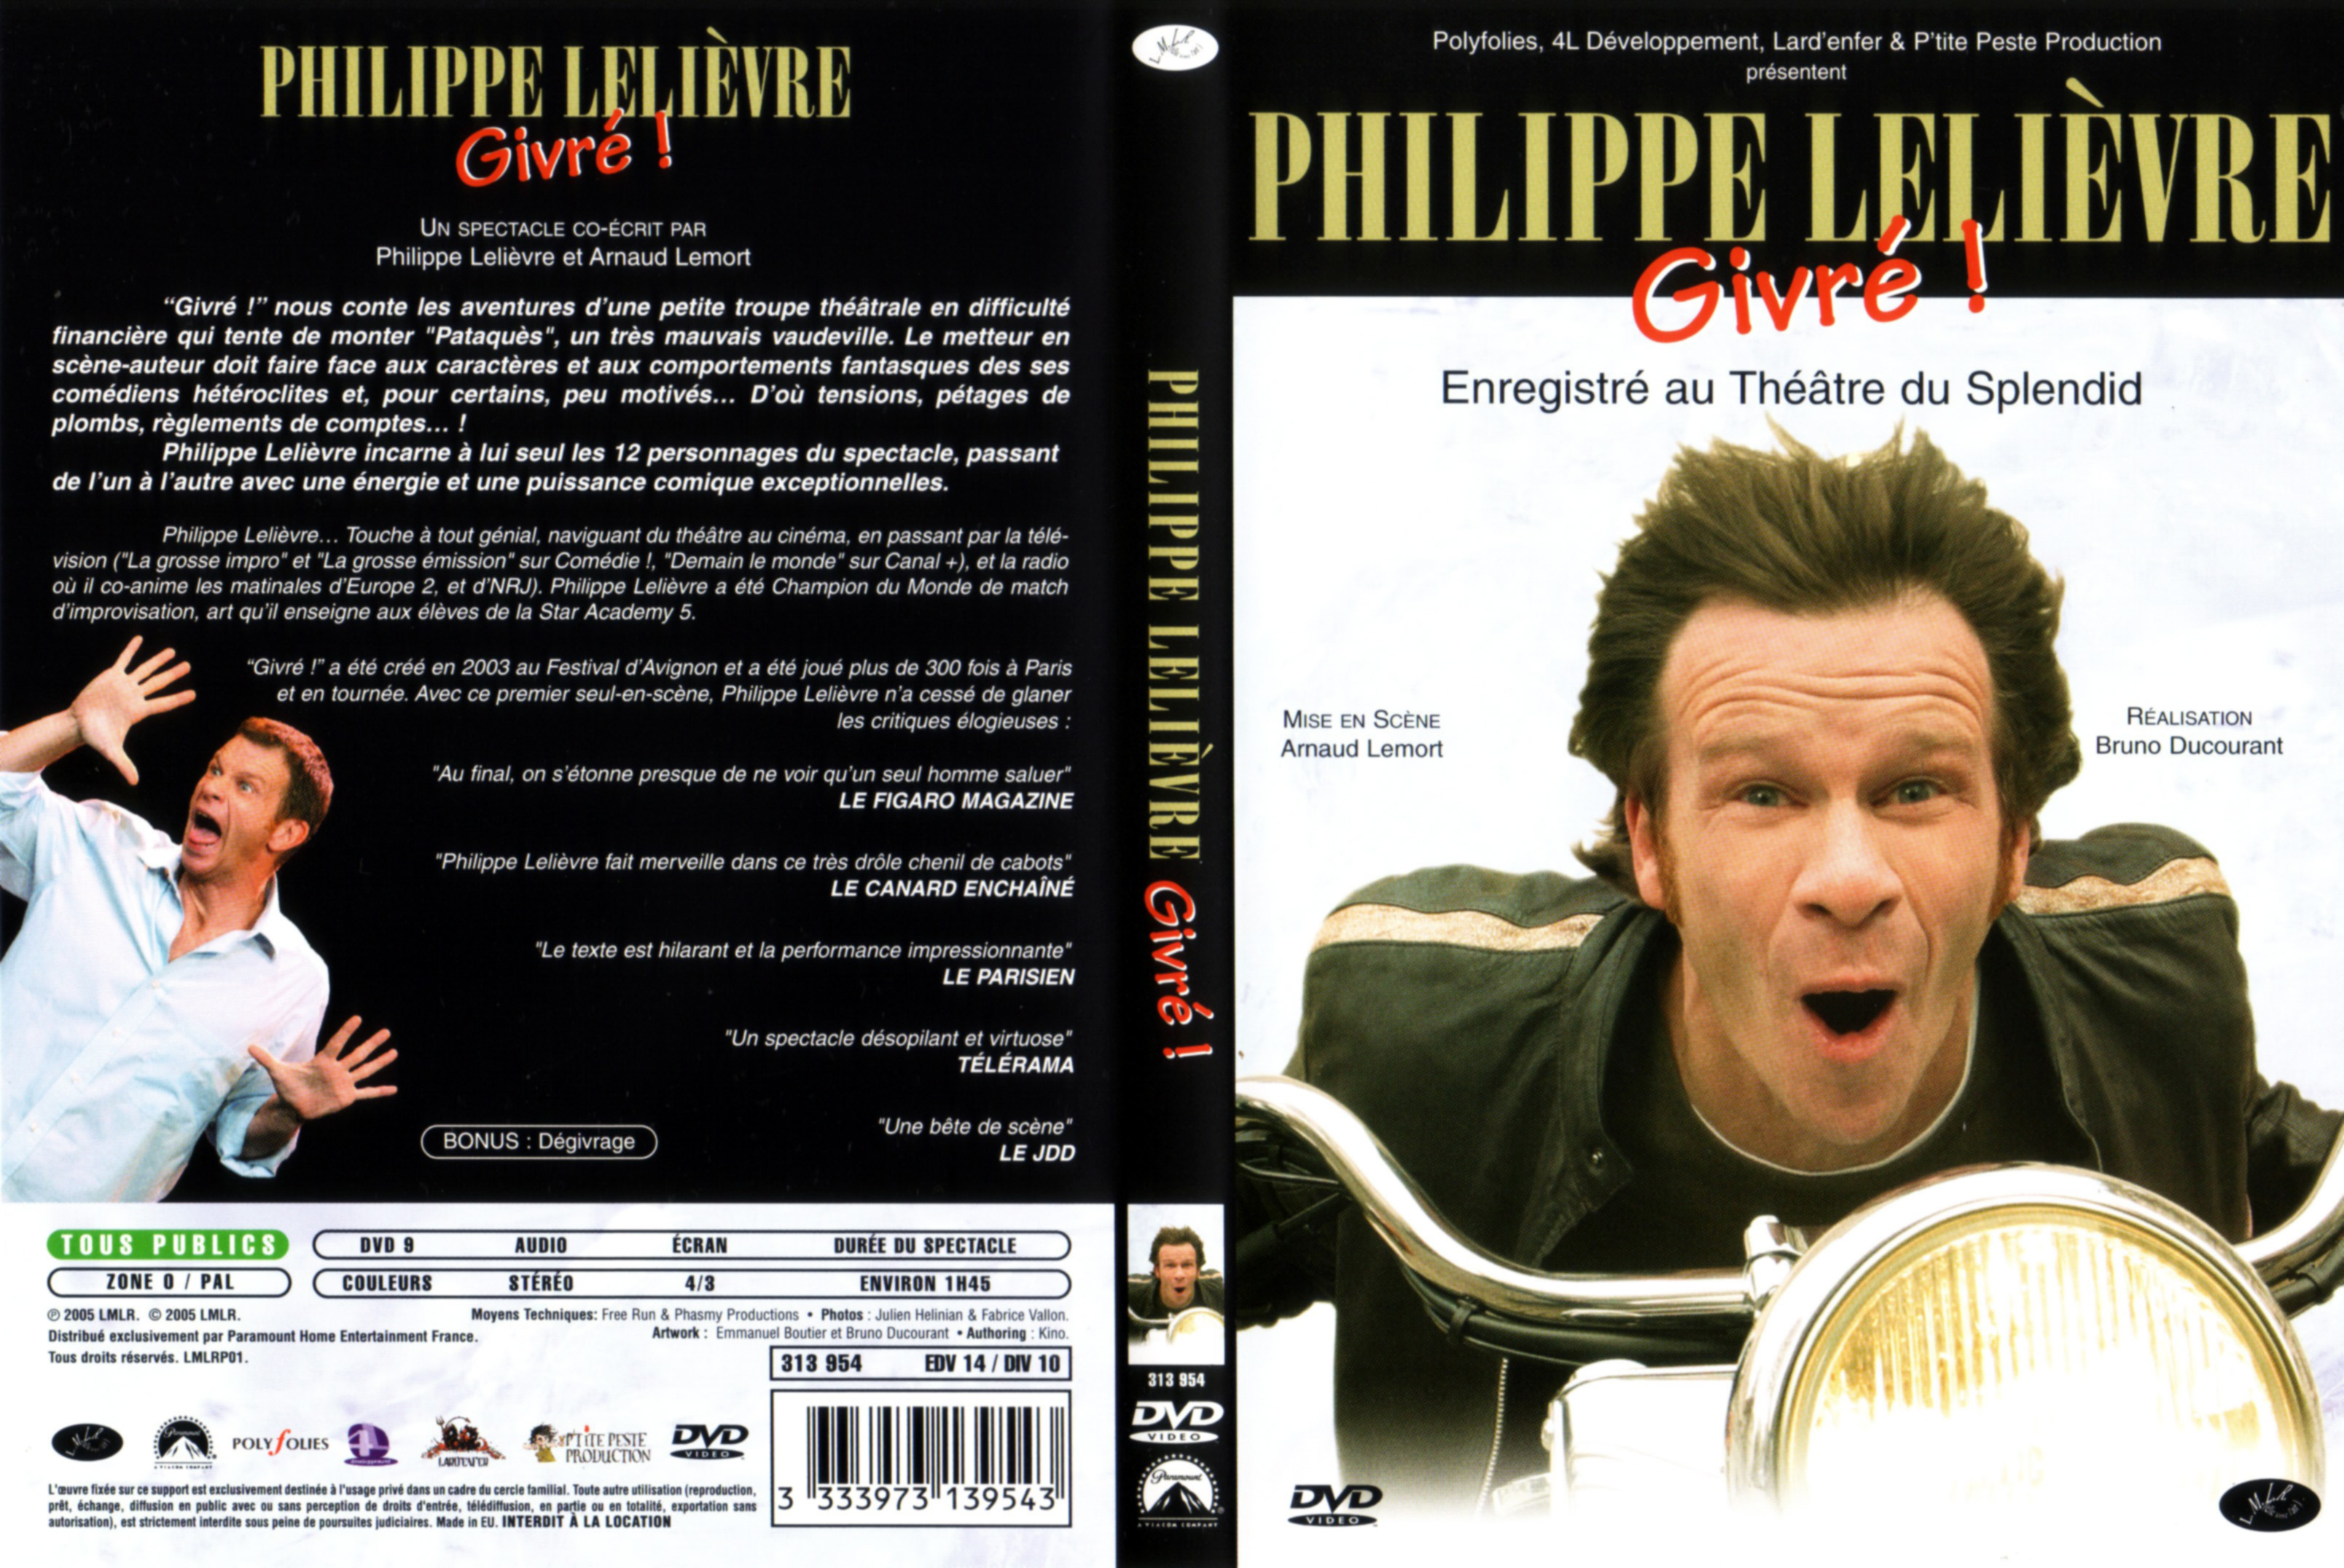 Jaquette DVD Philippe Lelievre - Givr